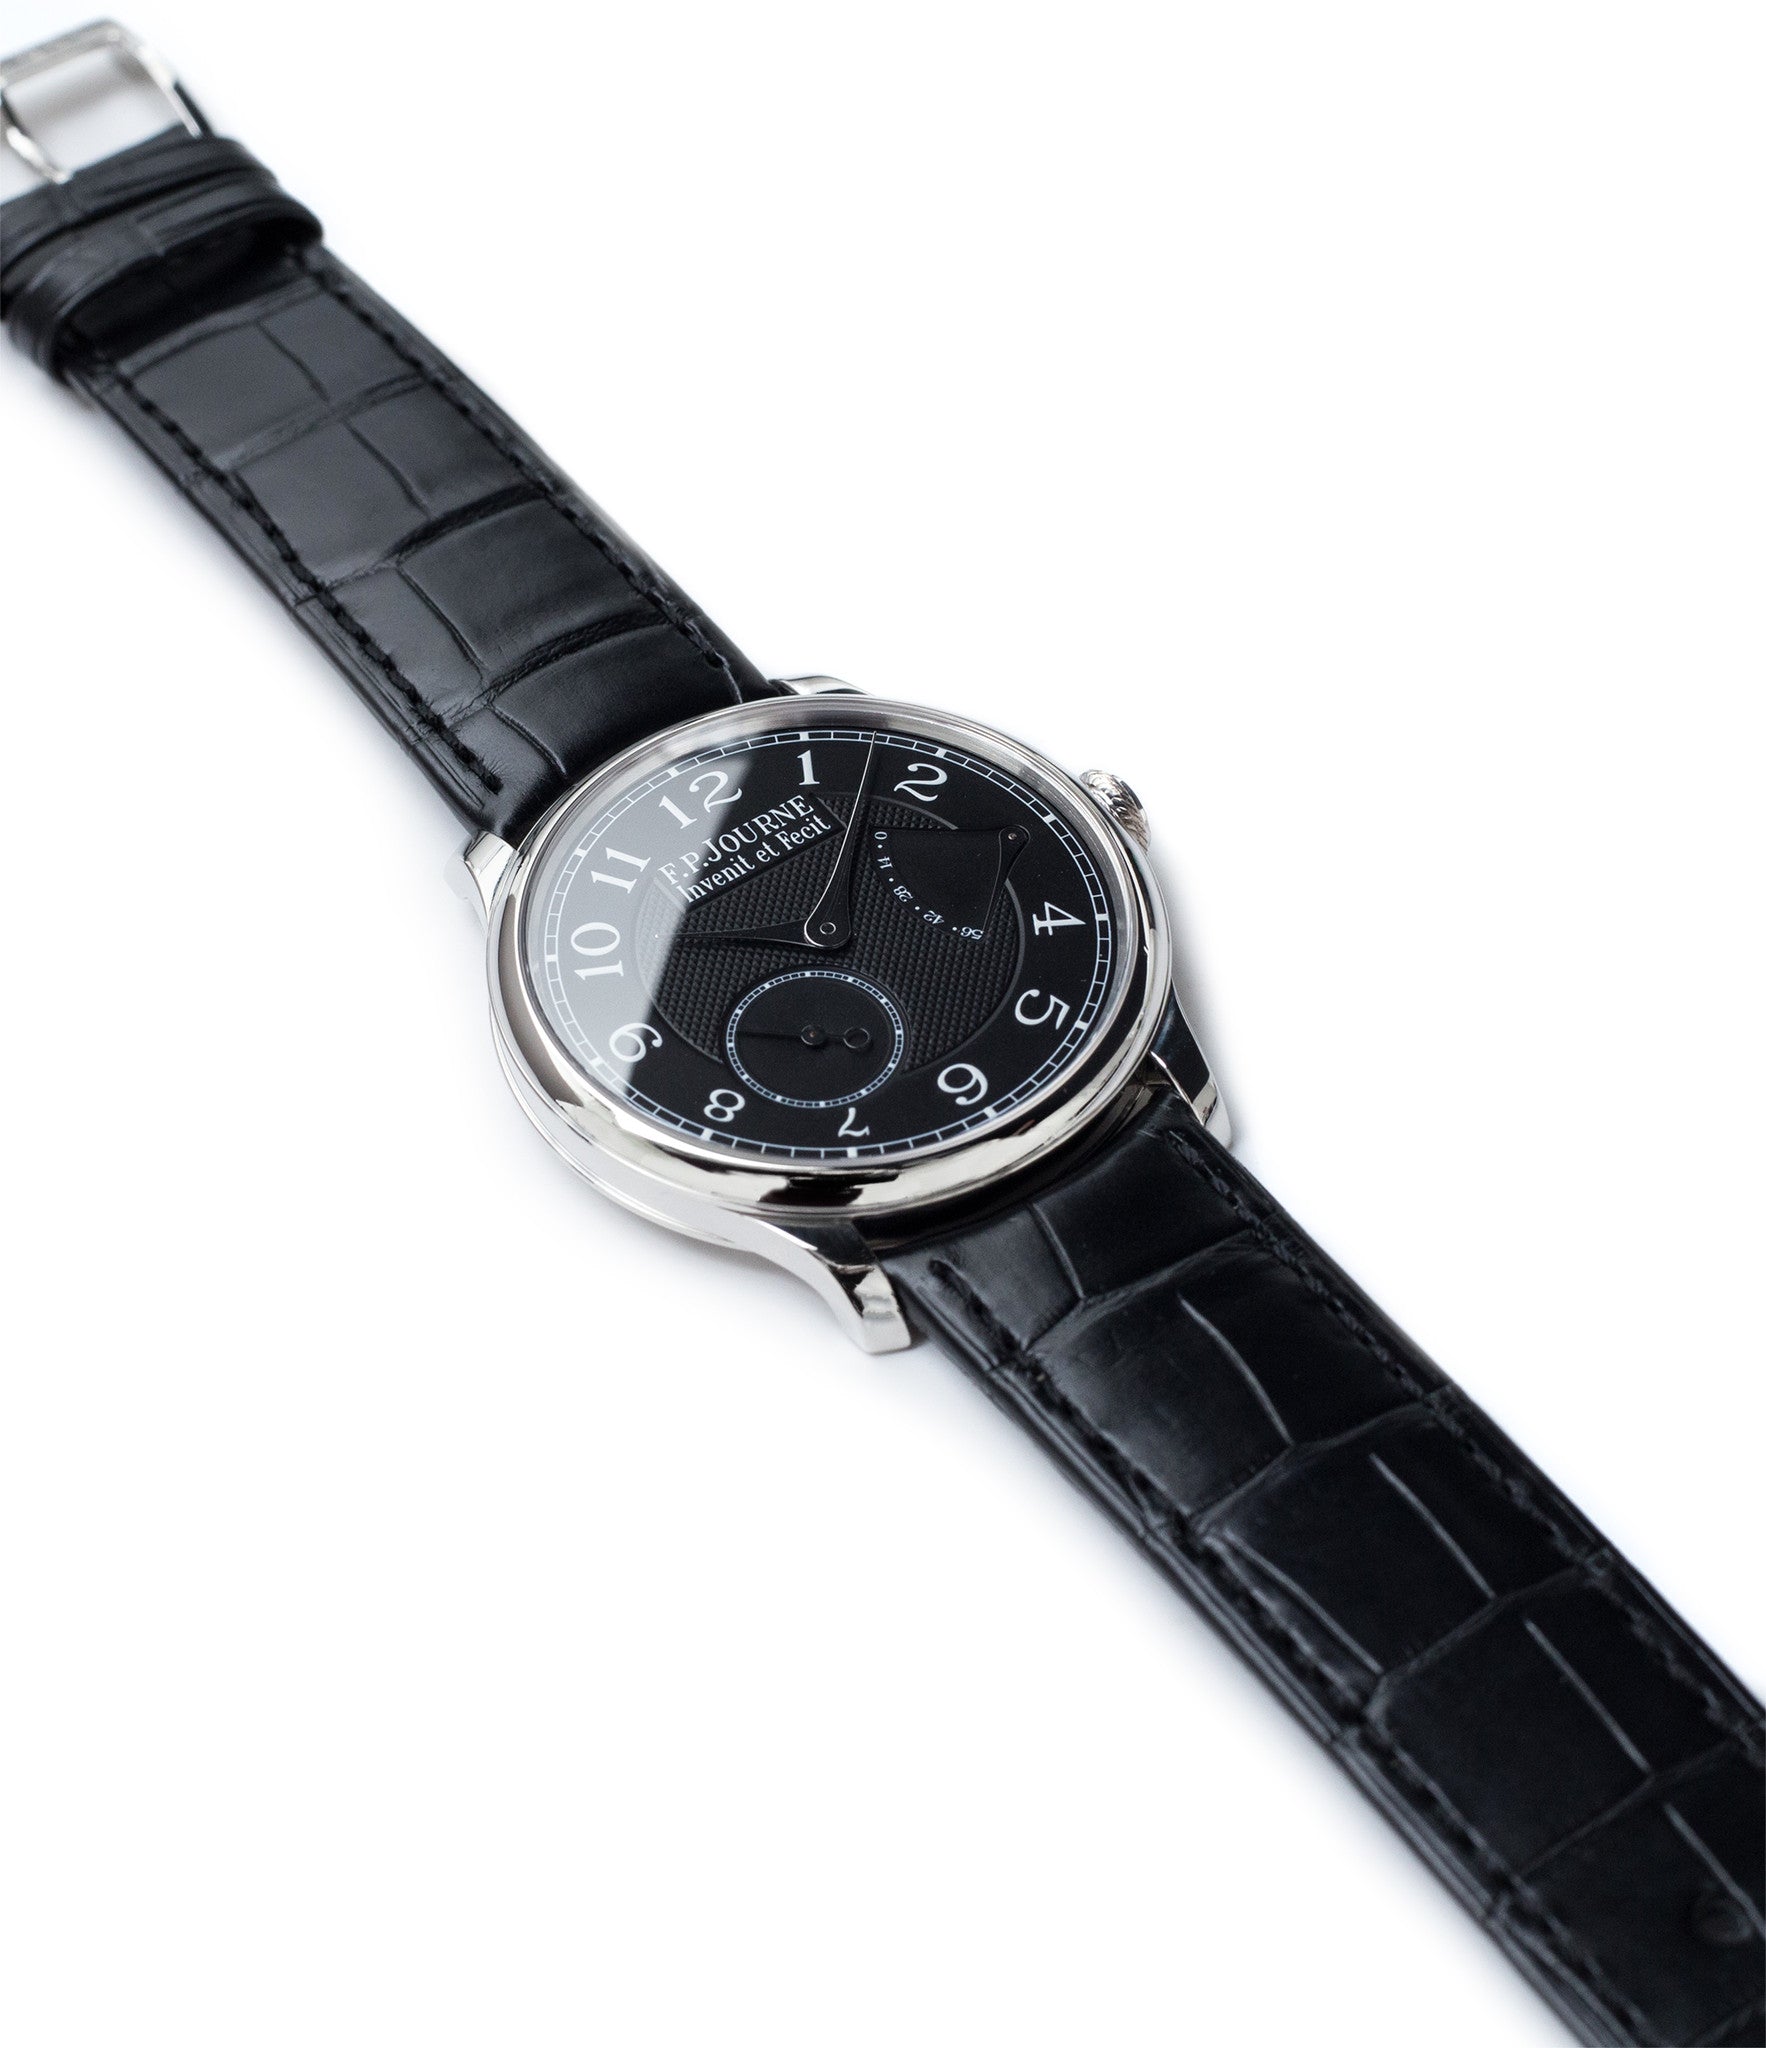 buy independent watchmaker F. P. Journe Chronometre Souverain Black label platinum 38 mm watch online at A Collected Man